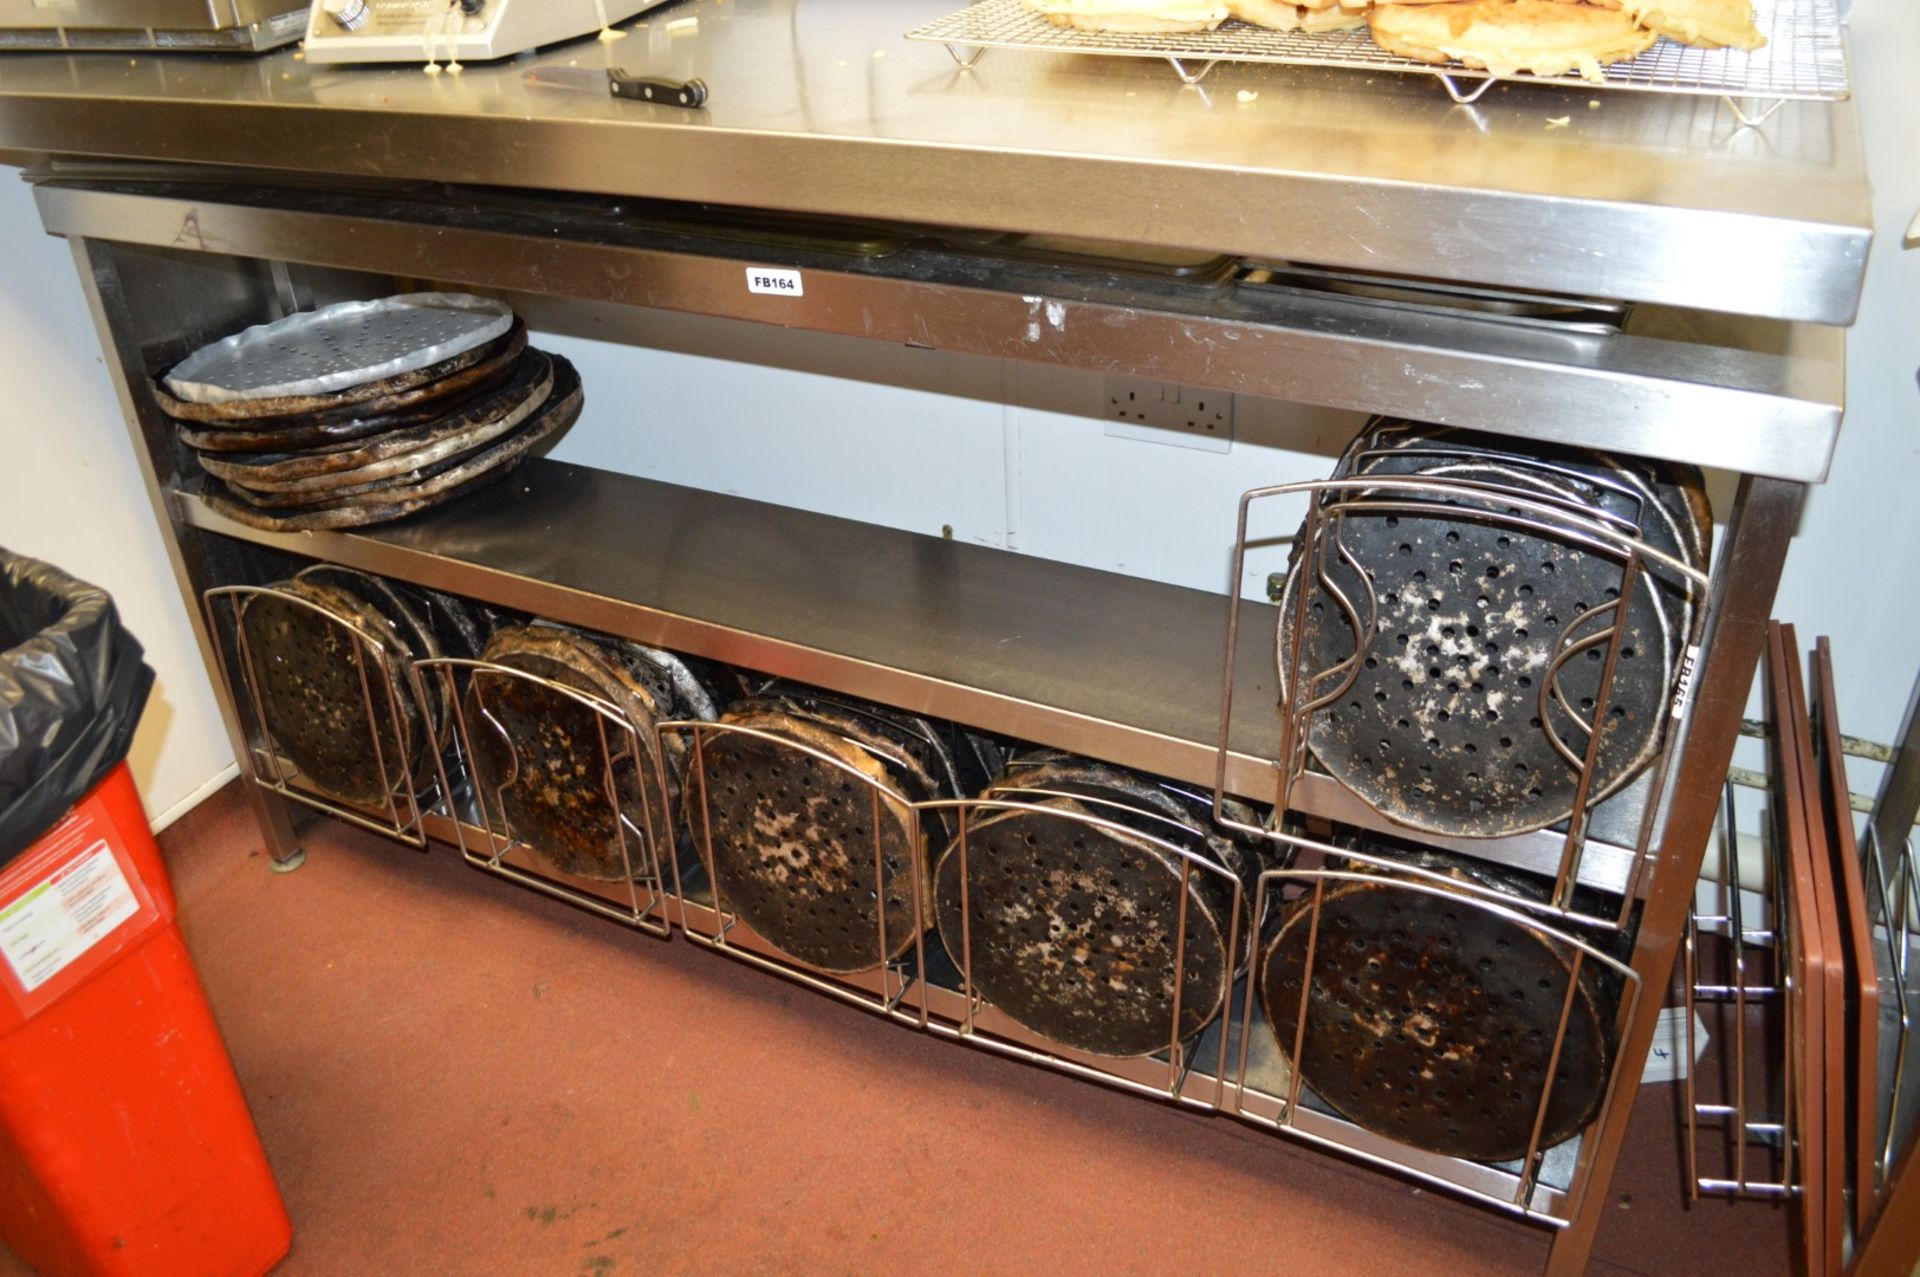 6 x Pizza Tray Stands With Pizza Trays - Ref FB165 - CL357 - Location: Bolton BL6 - Image 2 of 2